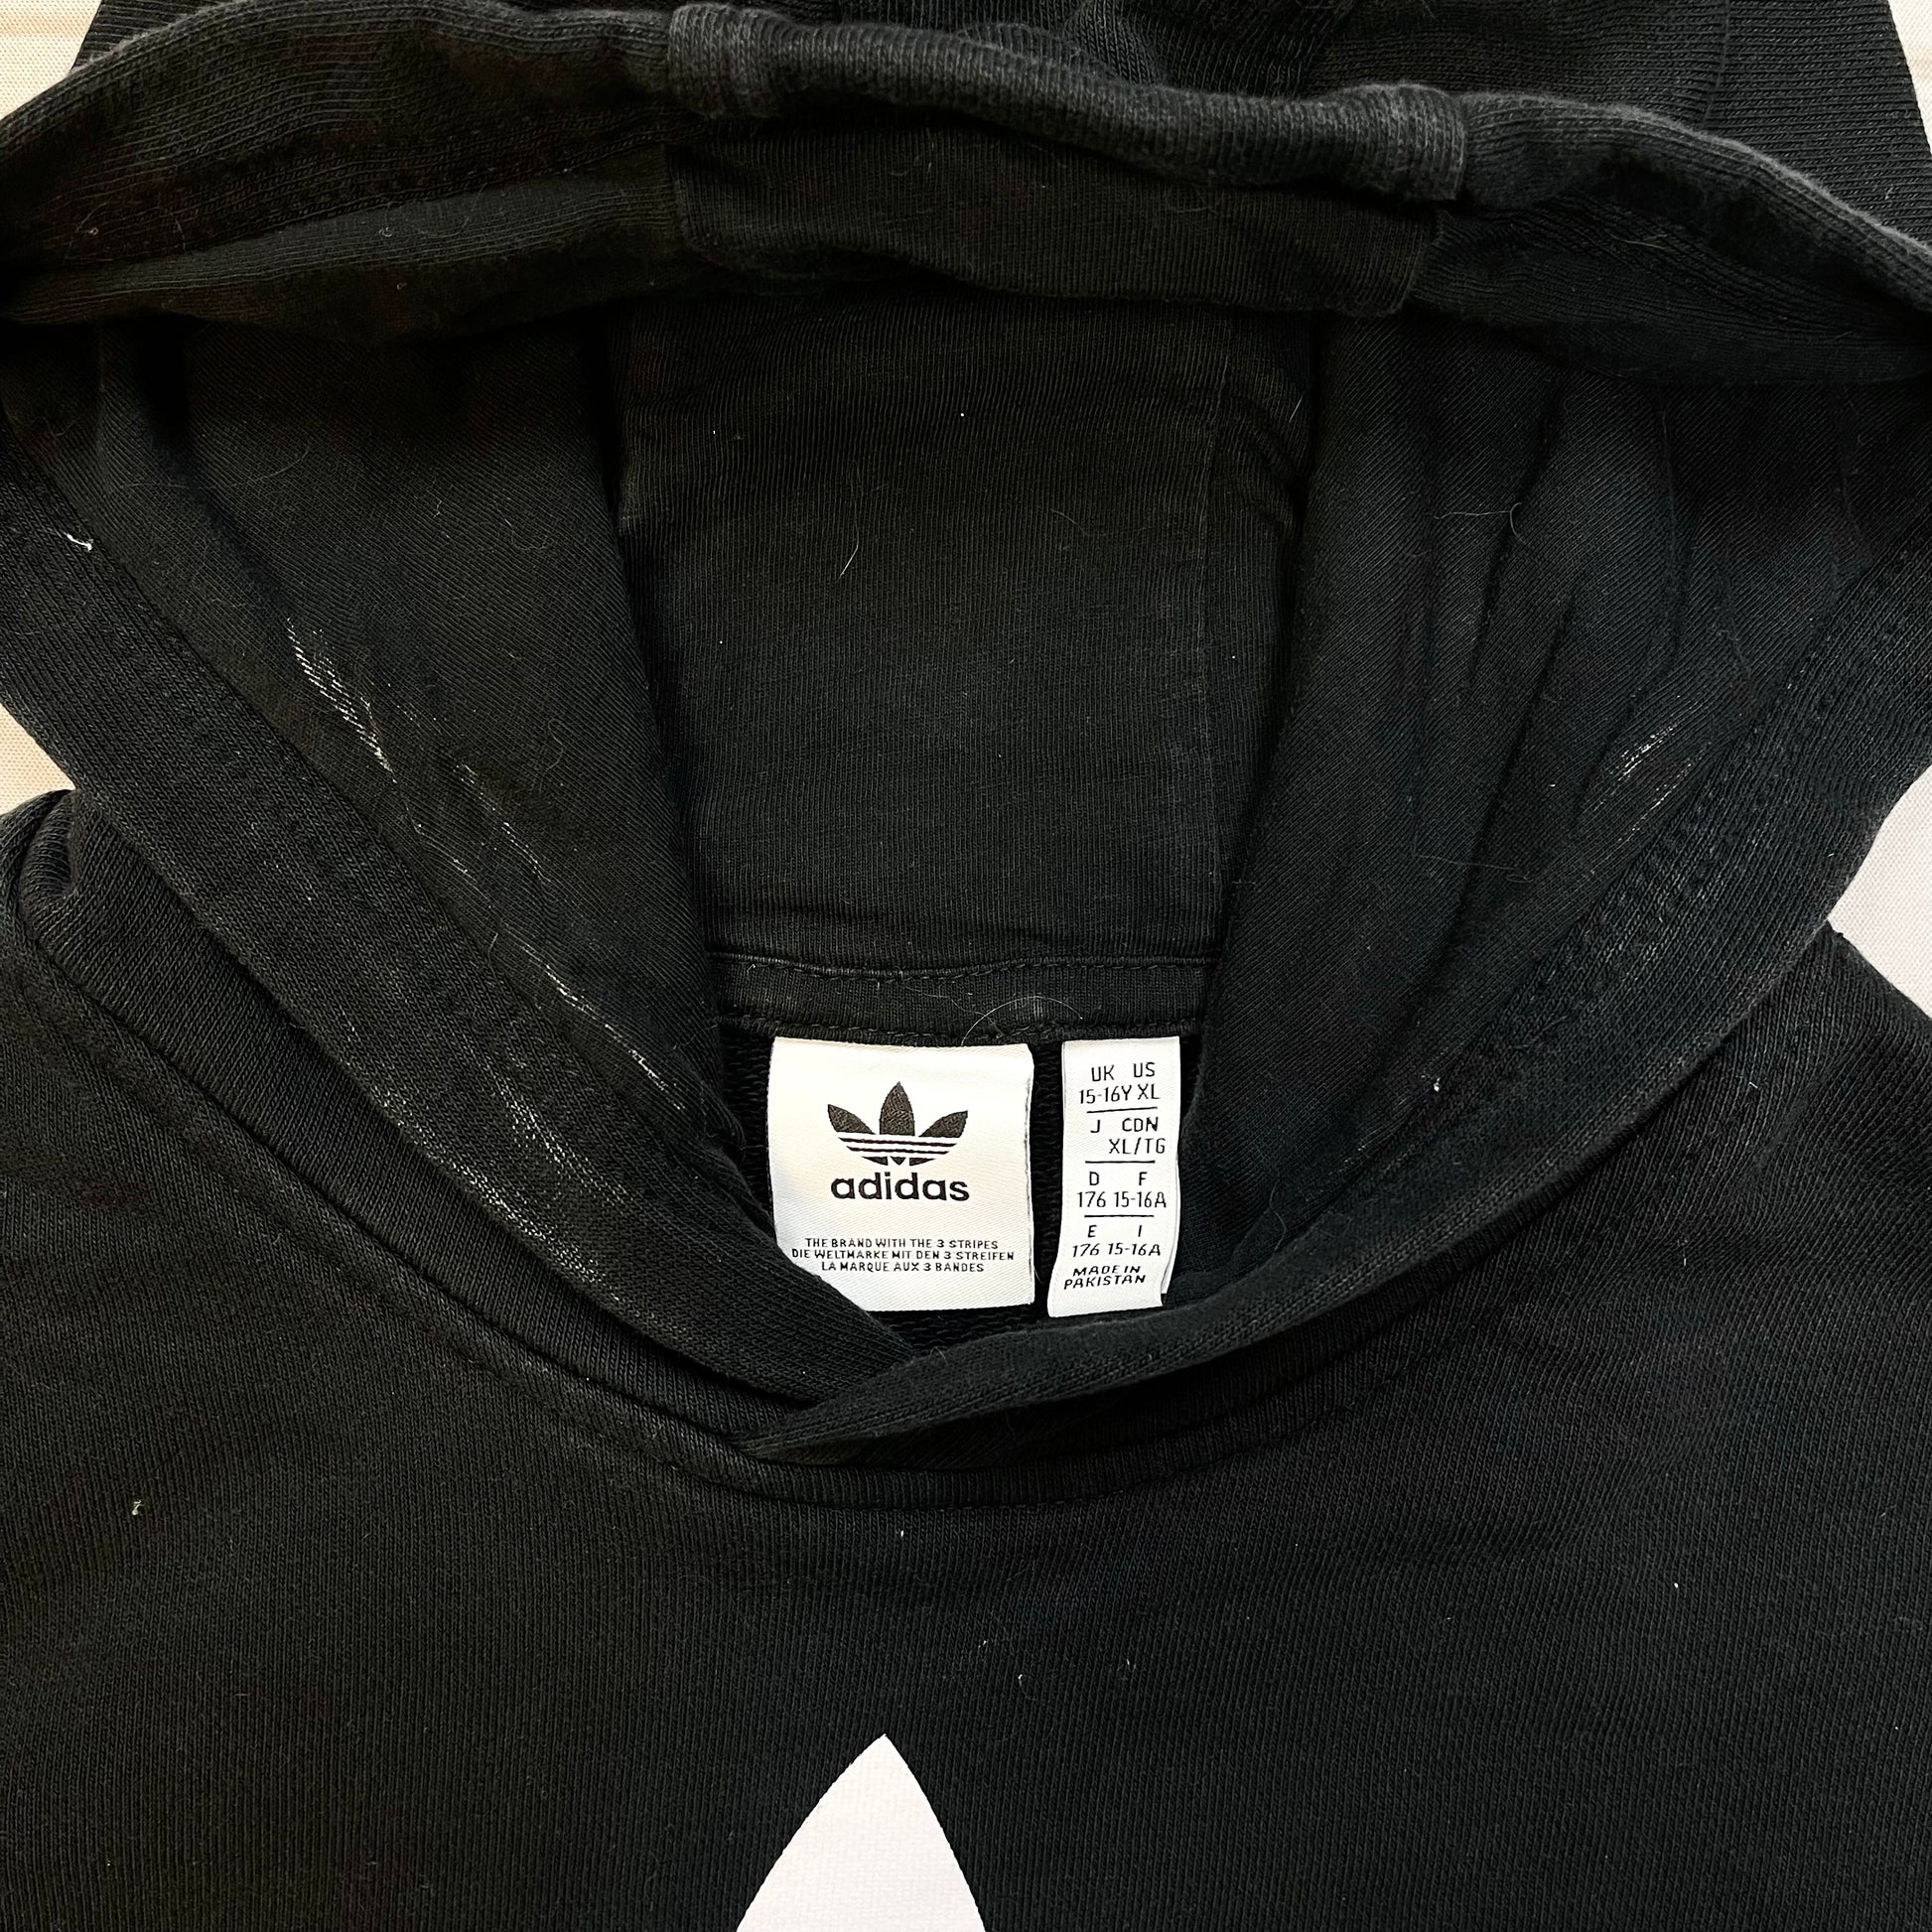 Xl By PA Sweatshirt Clothes West Mentor Chester – Hoodie Adidas Size: #178